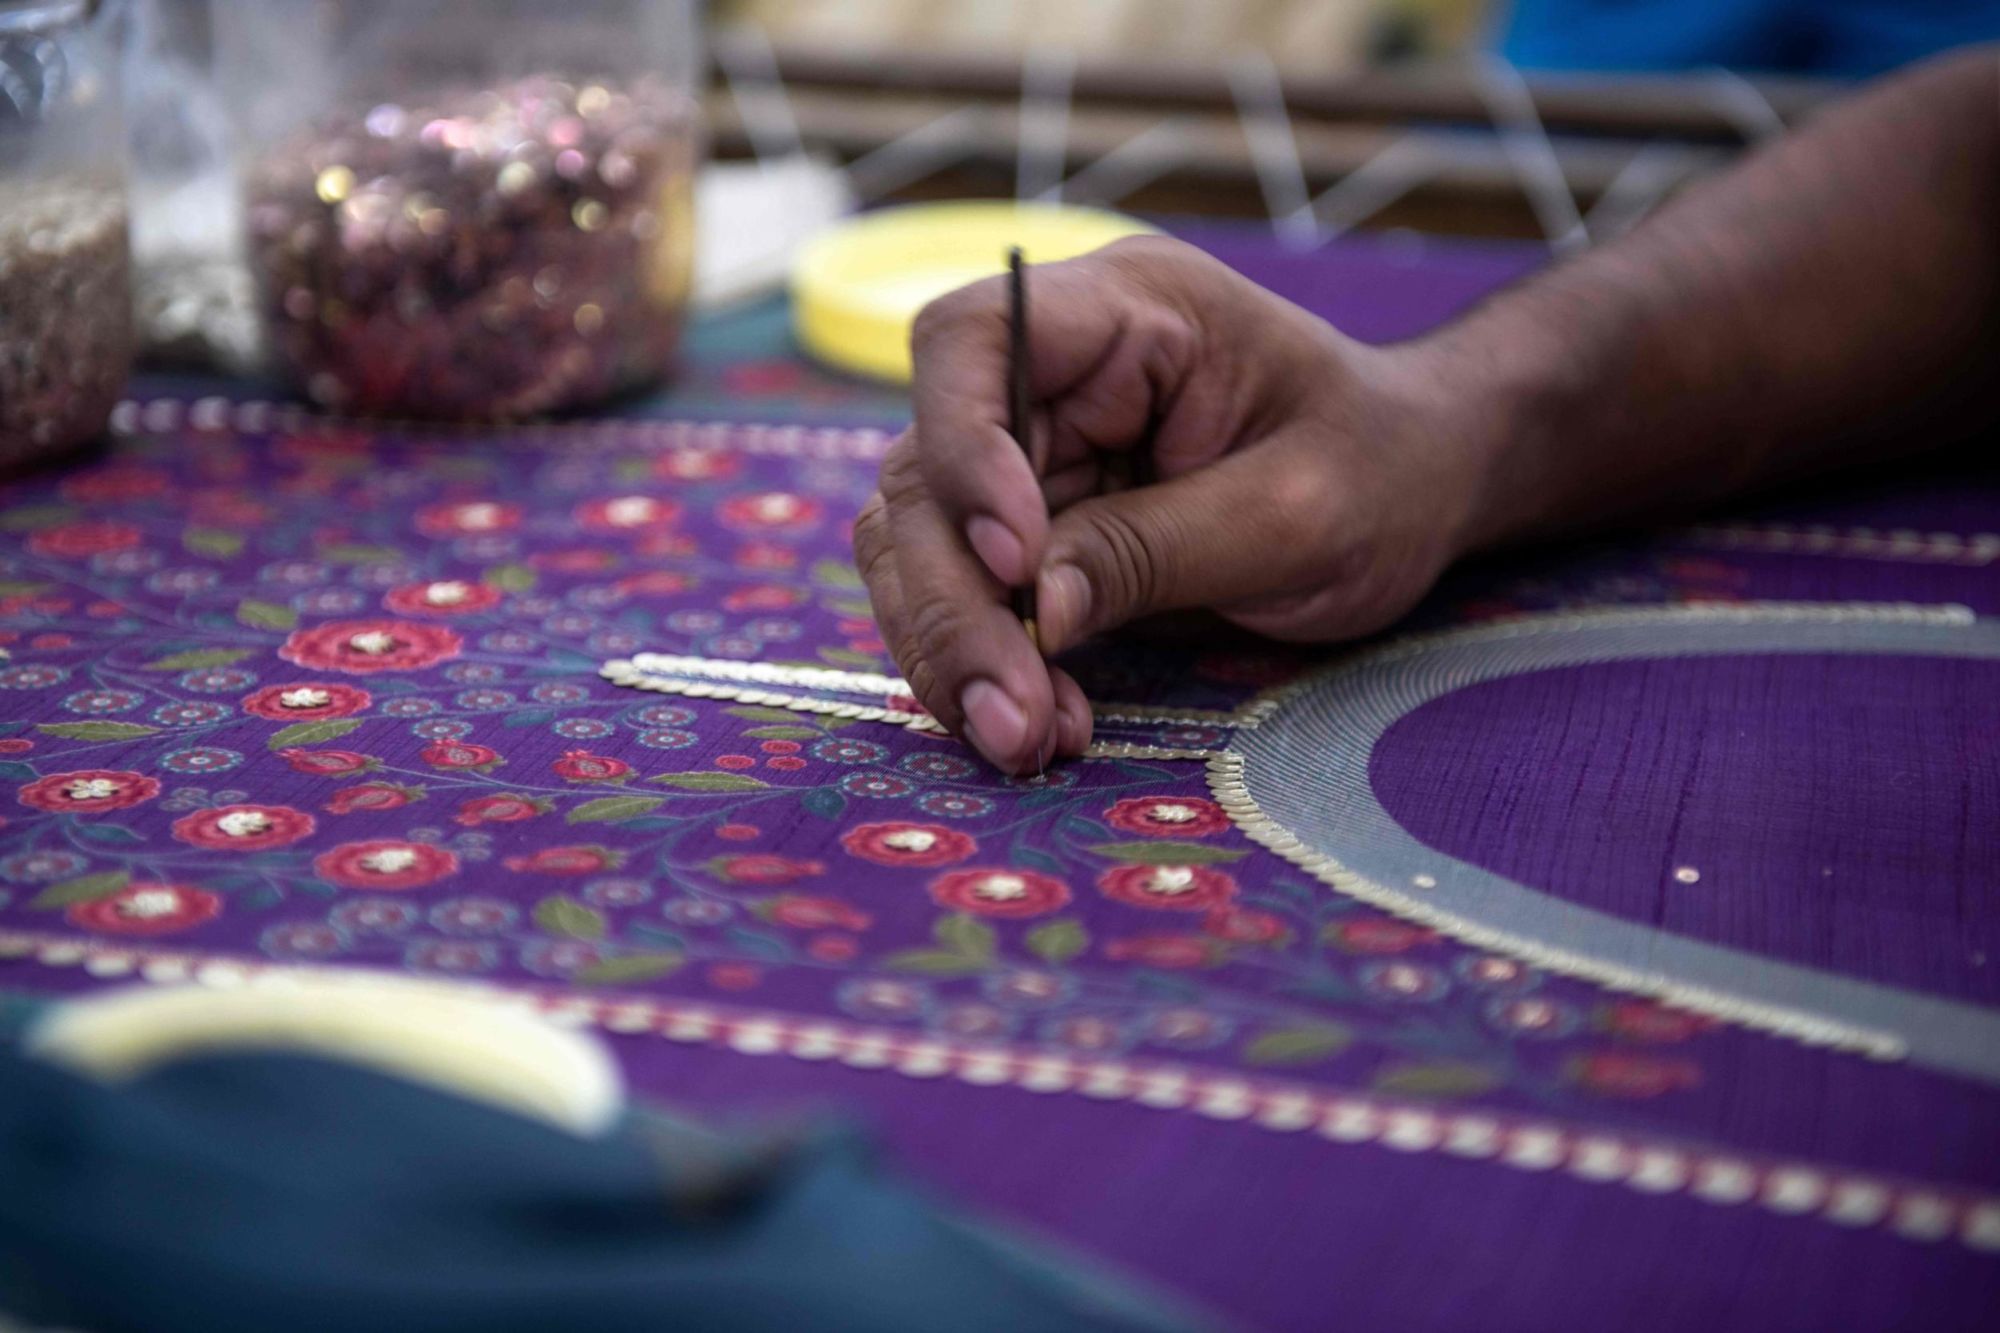 Indian artisans struggle to survive in fashion's 'invisible supply chains